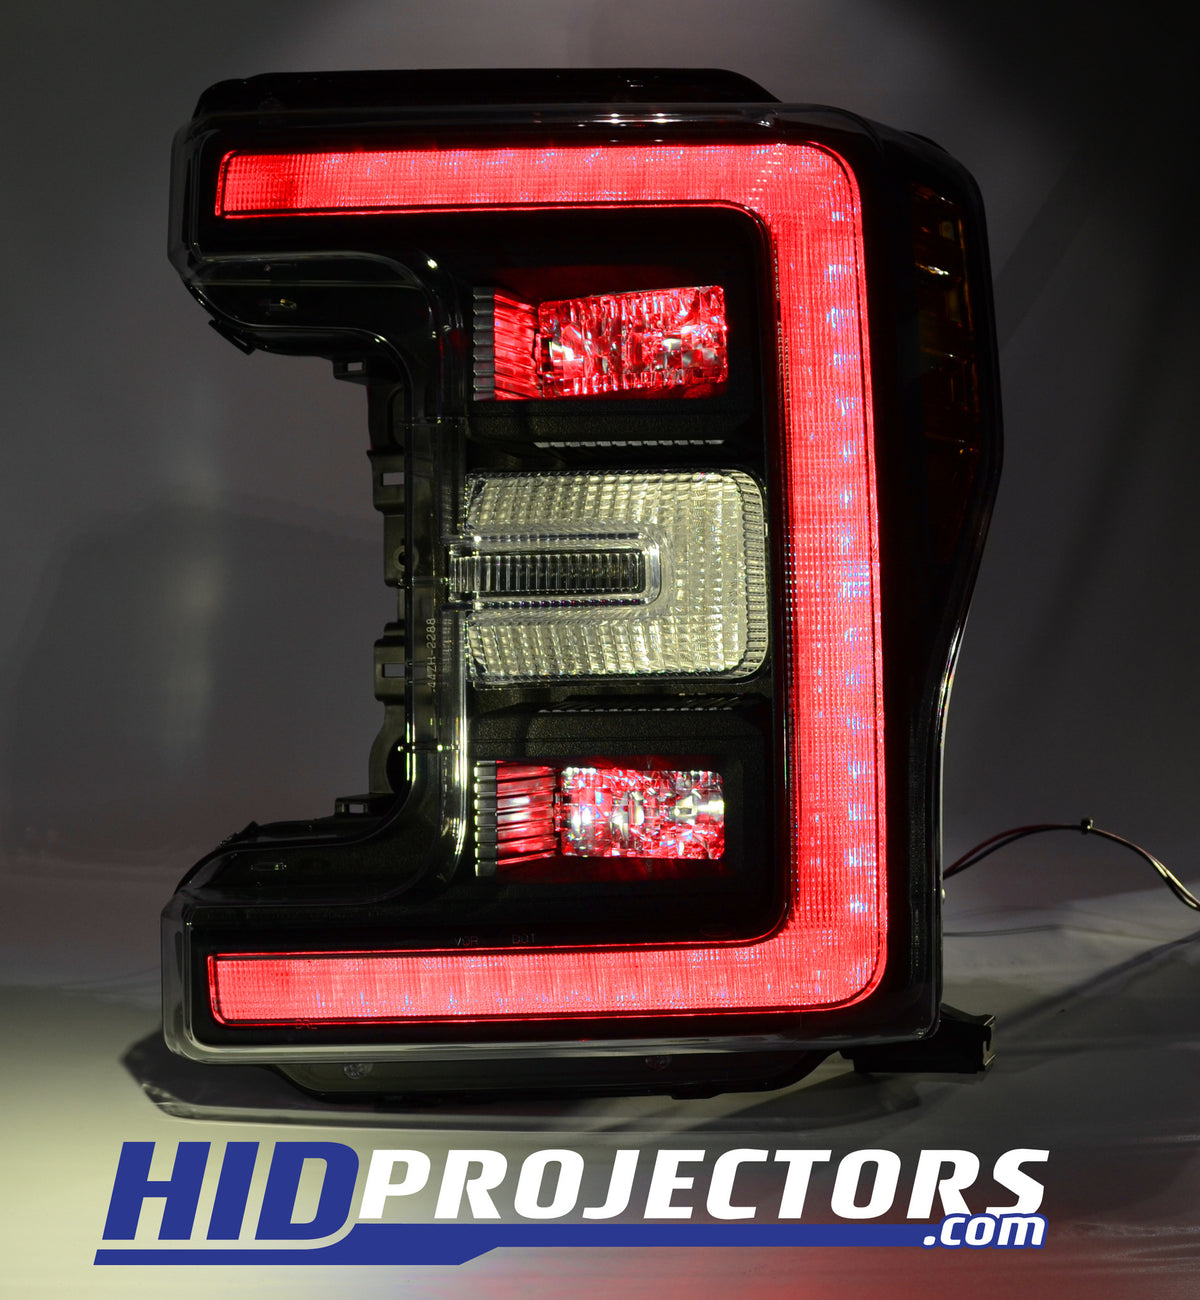 2017+ Ford Super Duty LED Headlight Upgrade (Includes New Headlights)